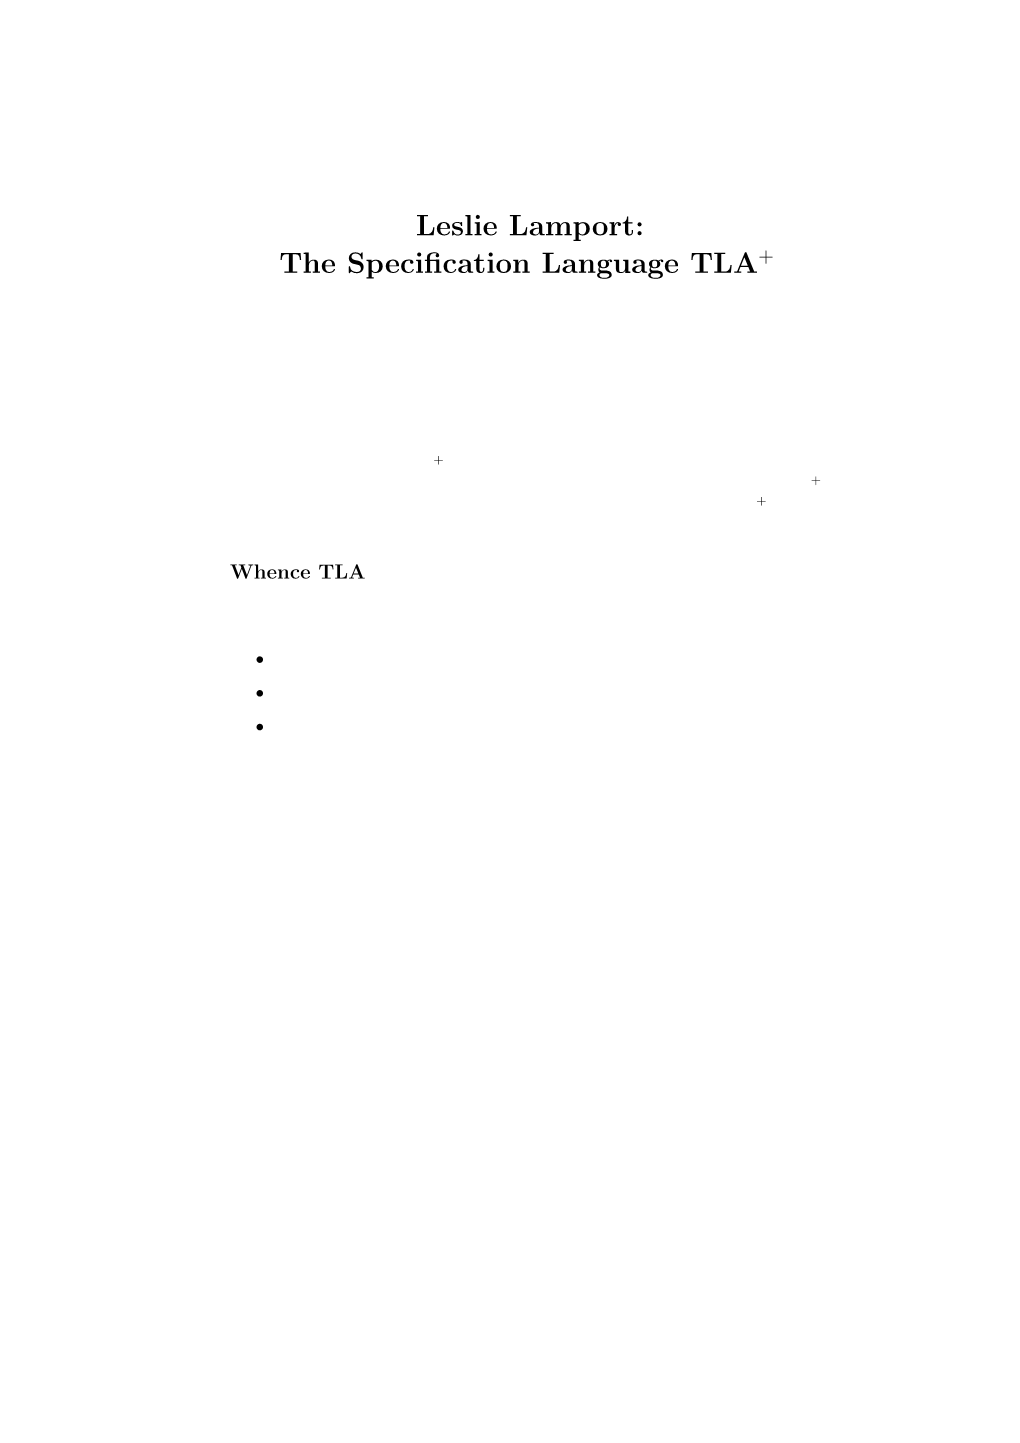 The Specification Language TLA+